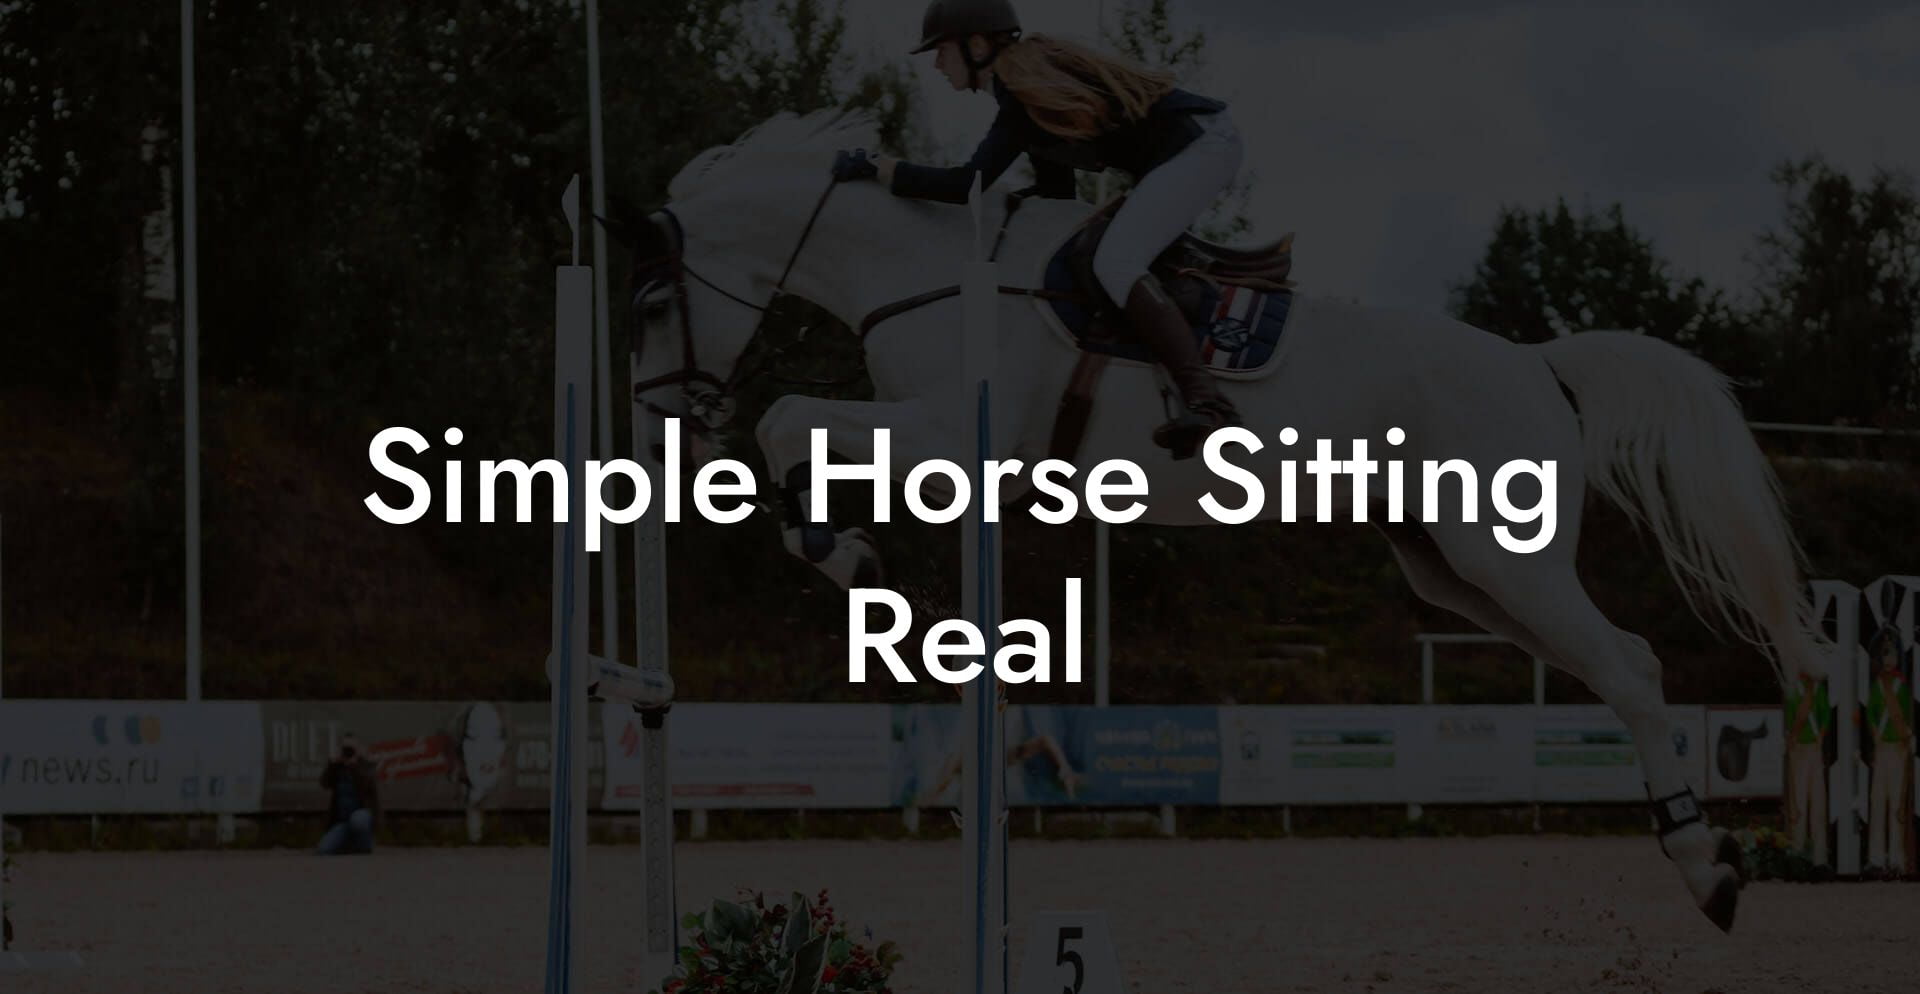 Simple Horse Sitting Real